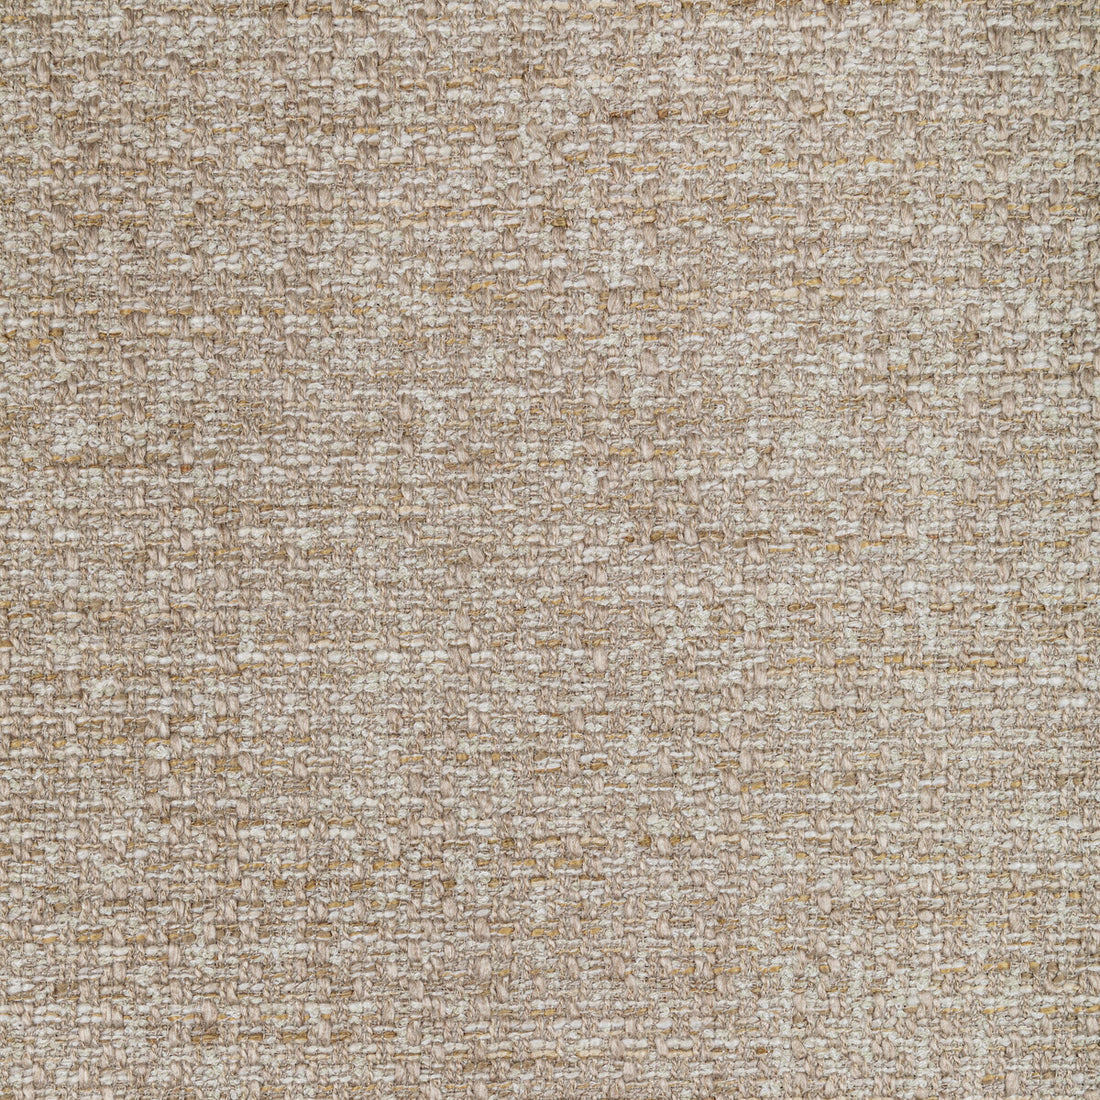 Dax fabric in sandstone color - pattern 36326.161.0 - by Kravet Contract